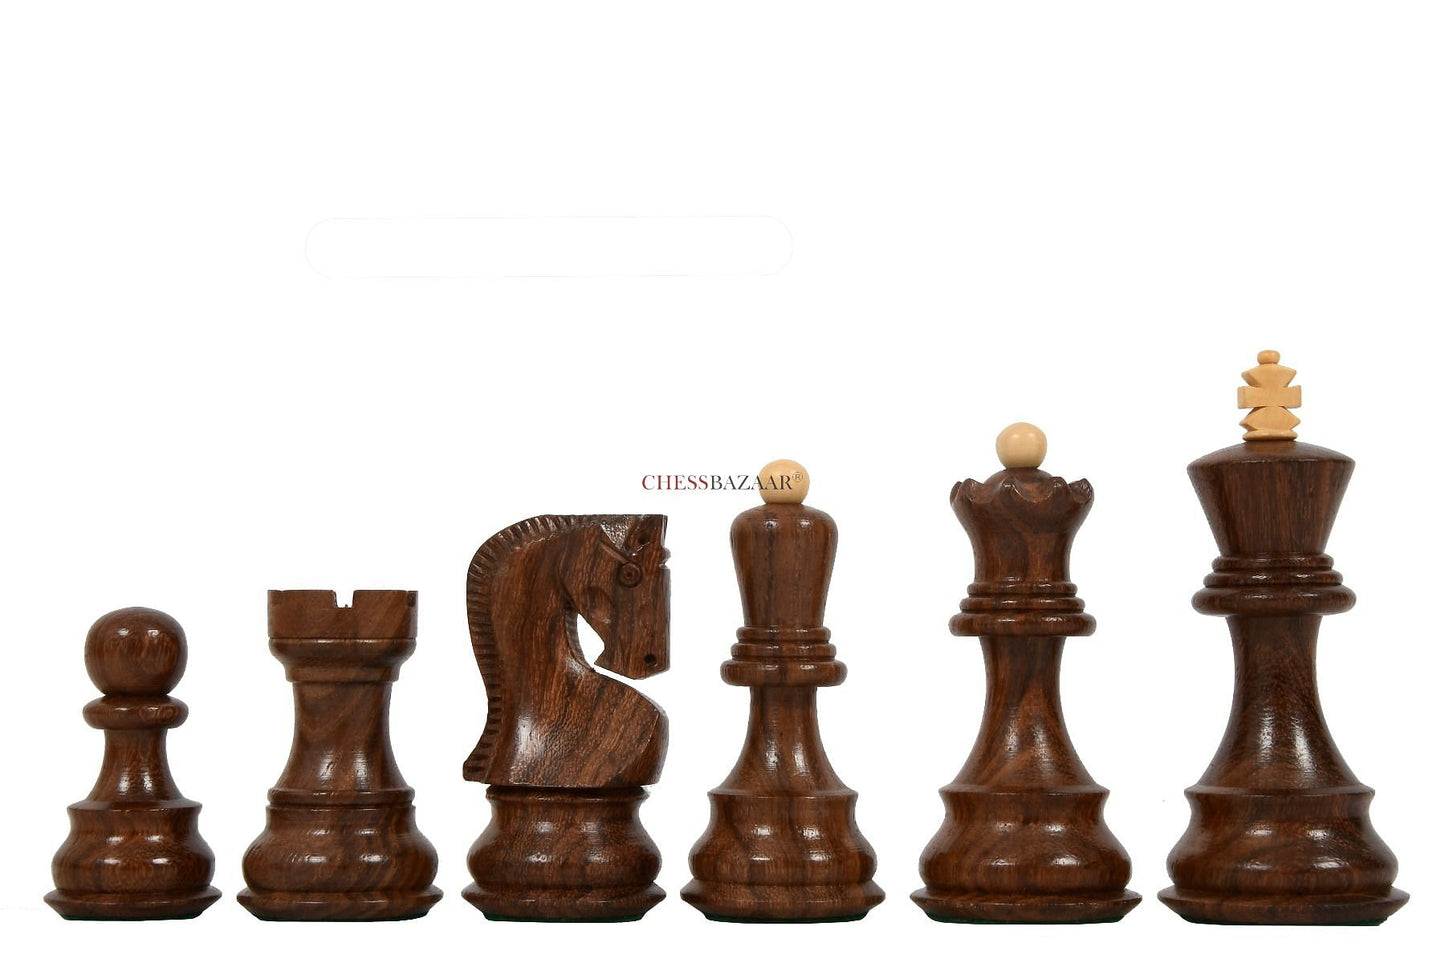 Old 1959 Russian Zagreb Staunton Chess Pieces in Sheesham Wood / Boxwood - 3.8" King